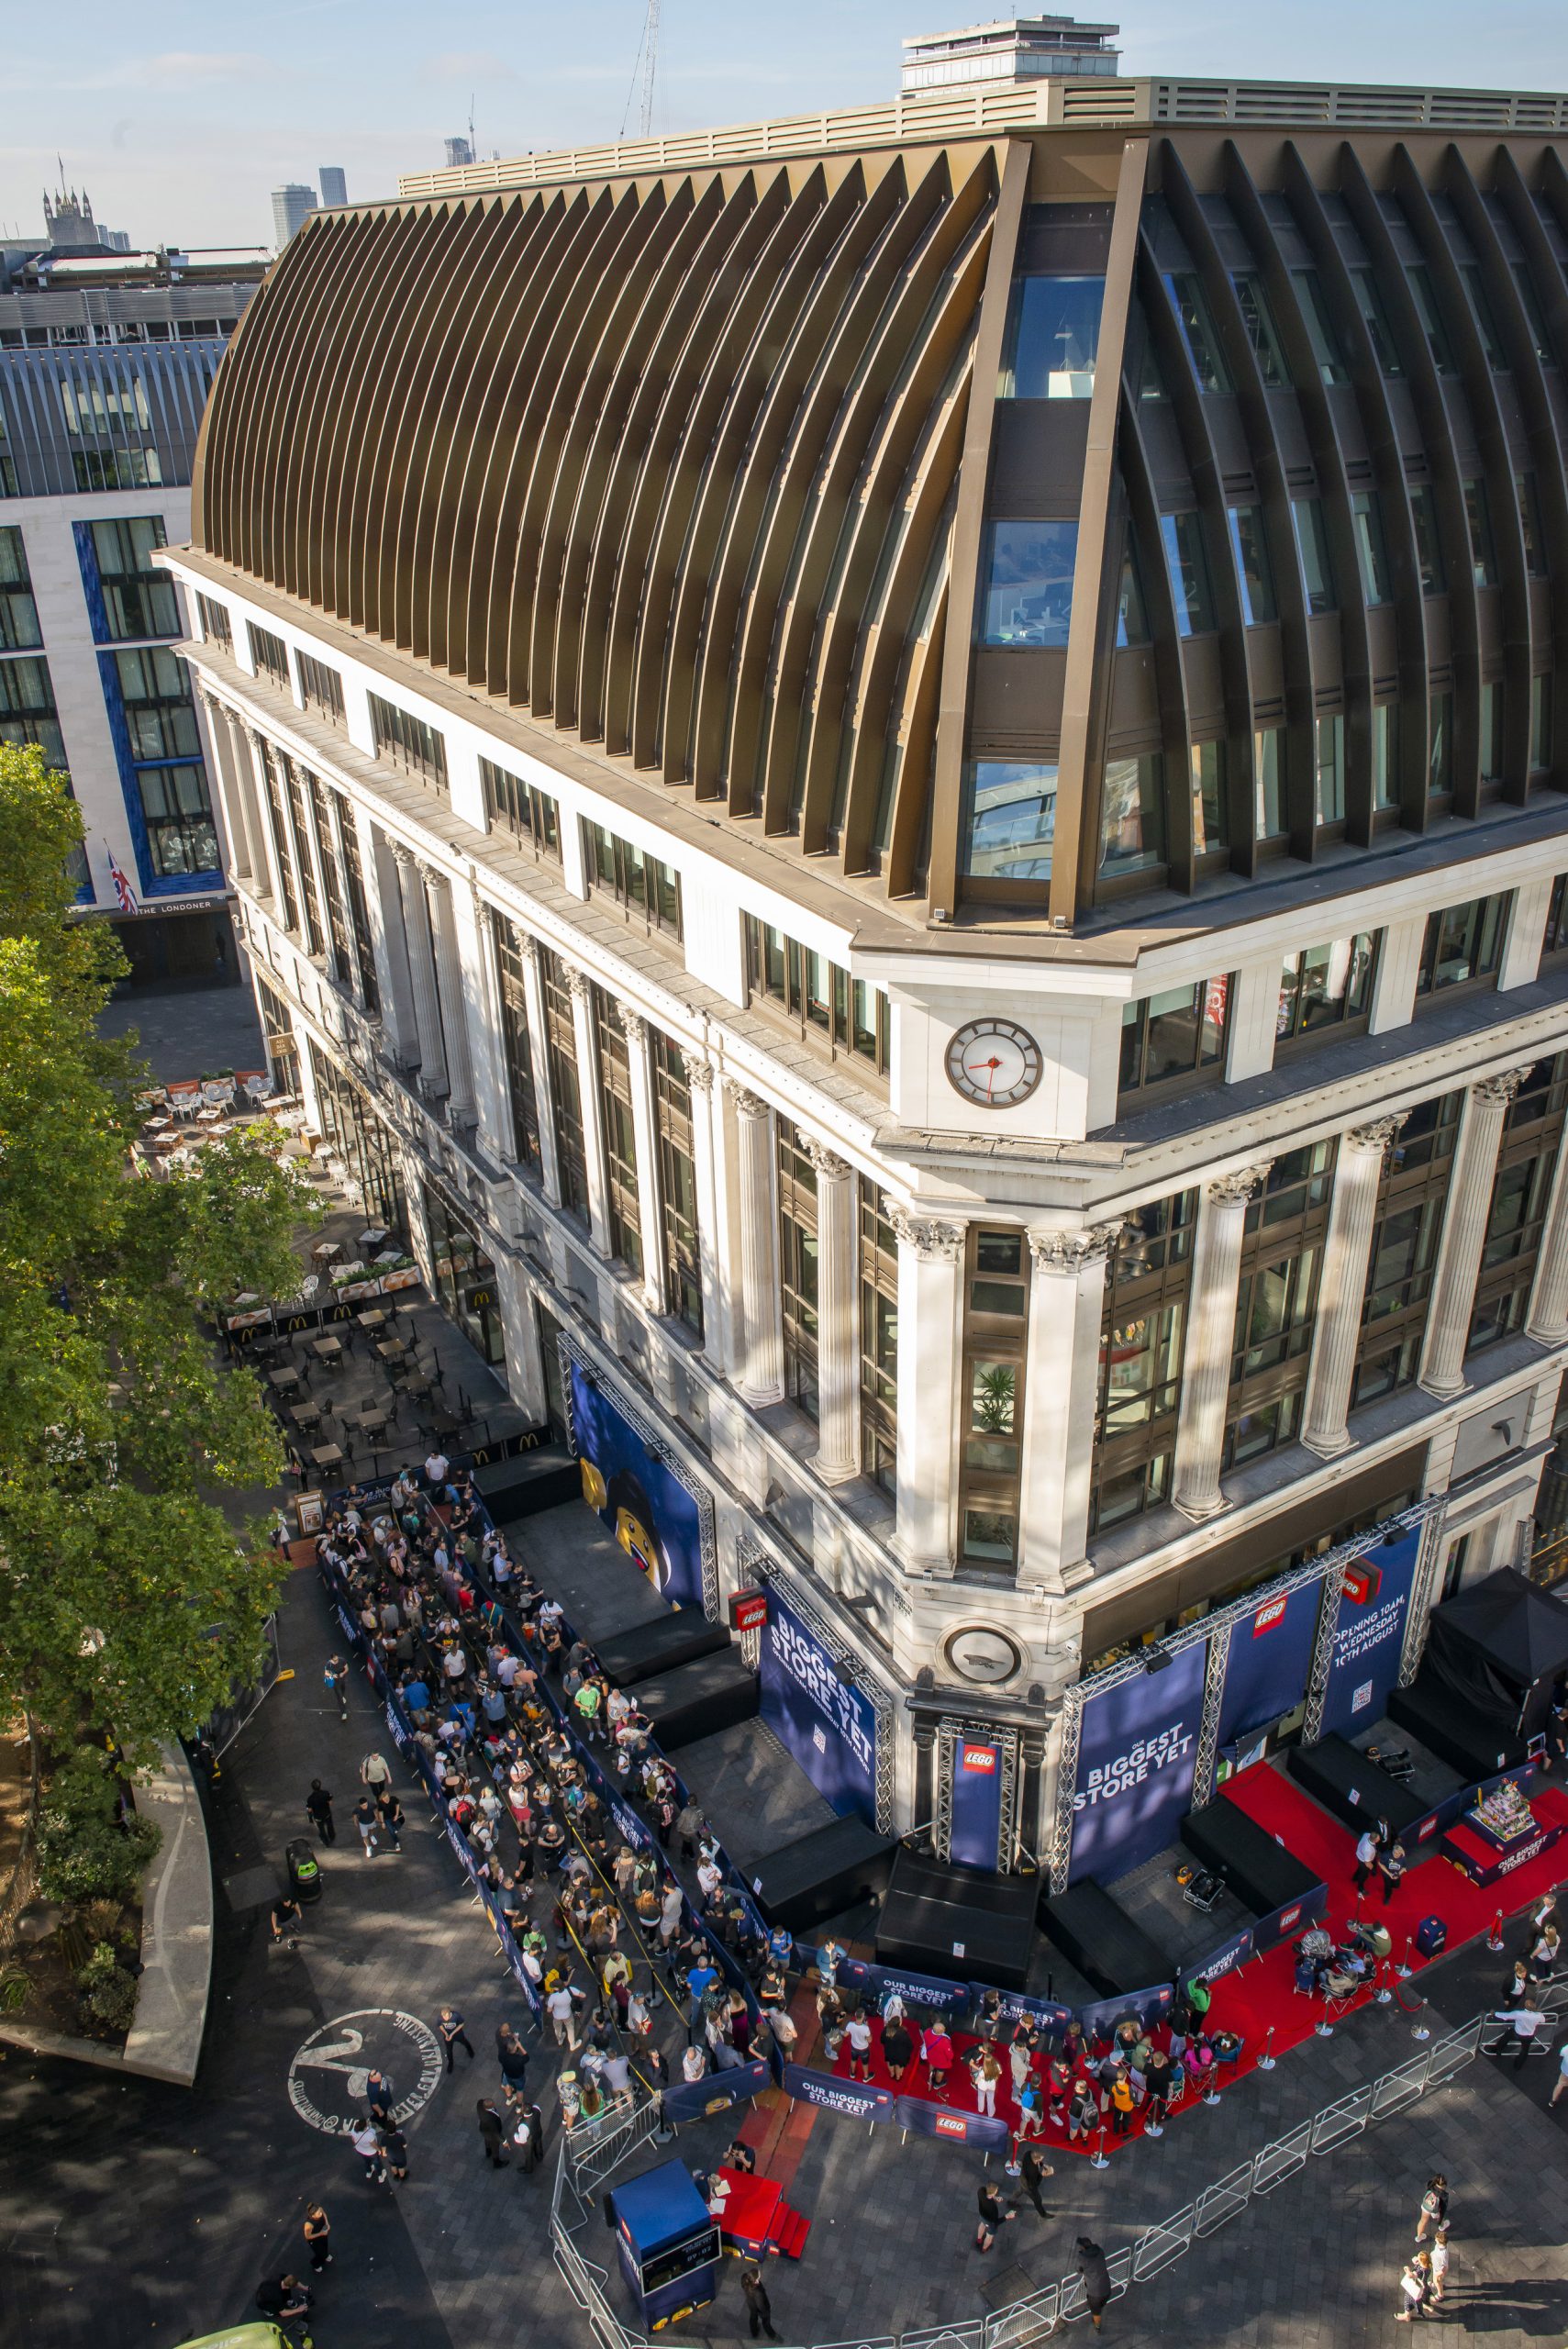 Flagship Grand Opening, Lego Leicester Square — Planarama